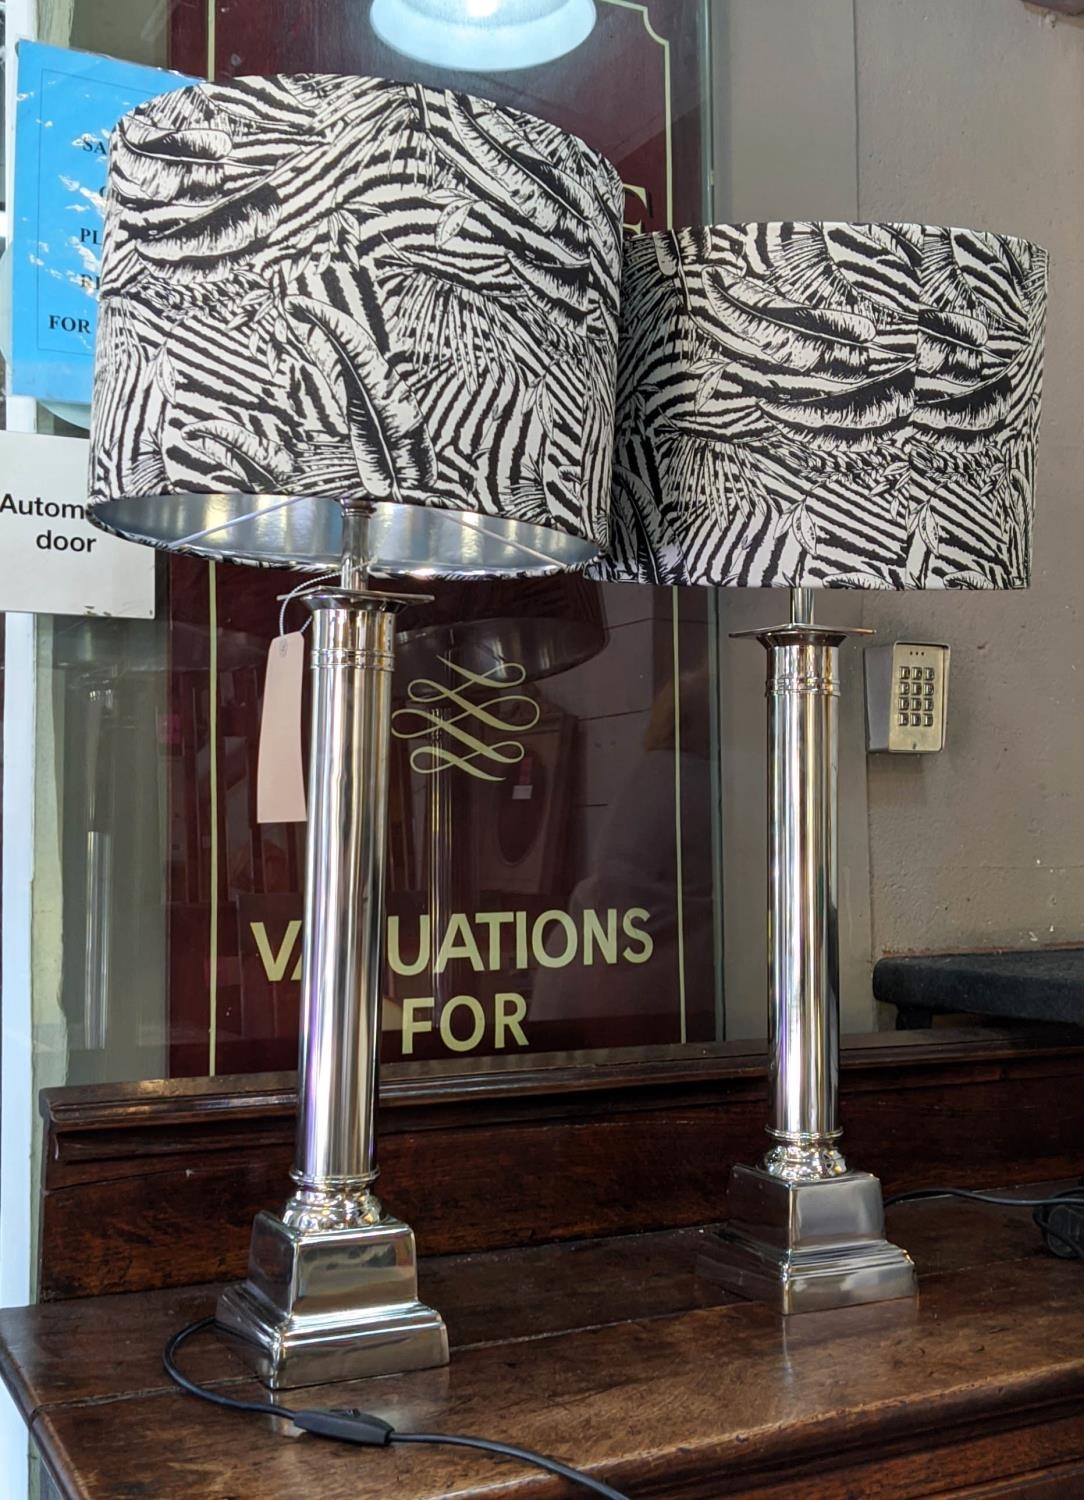 TABLE LAMPS, a pair, polished metal column design, black and white foliate print shades, 81cm H x